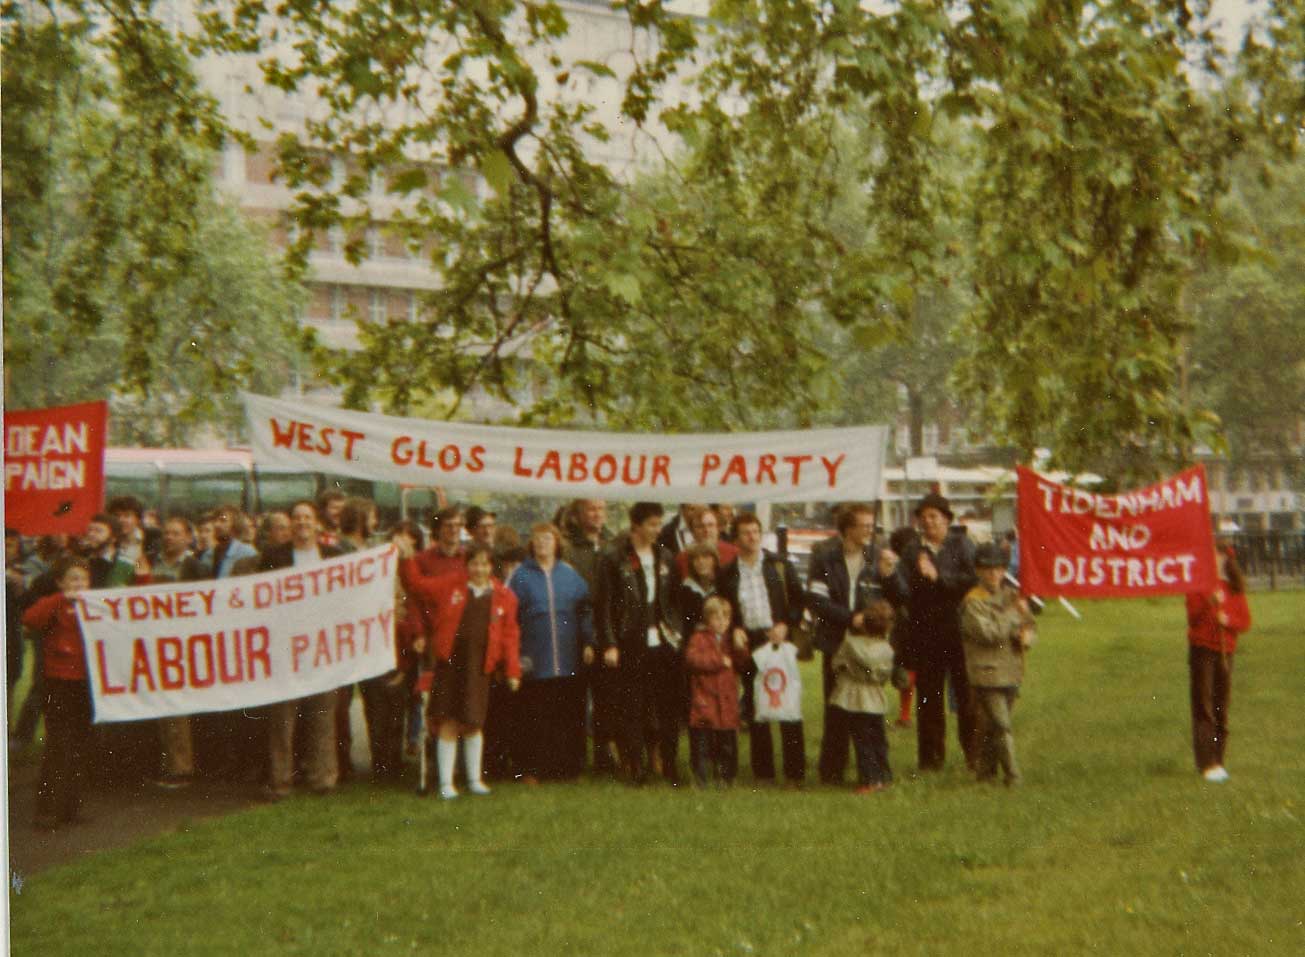 A photo of West Gloucestershire Labour Party members in Hyde Park, London